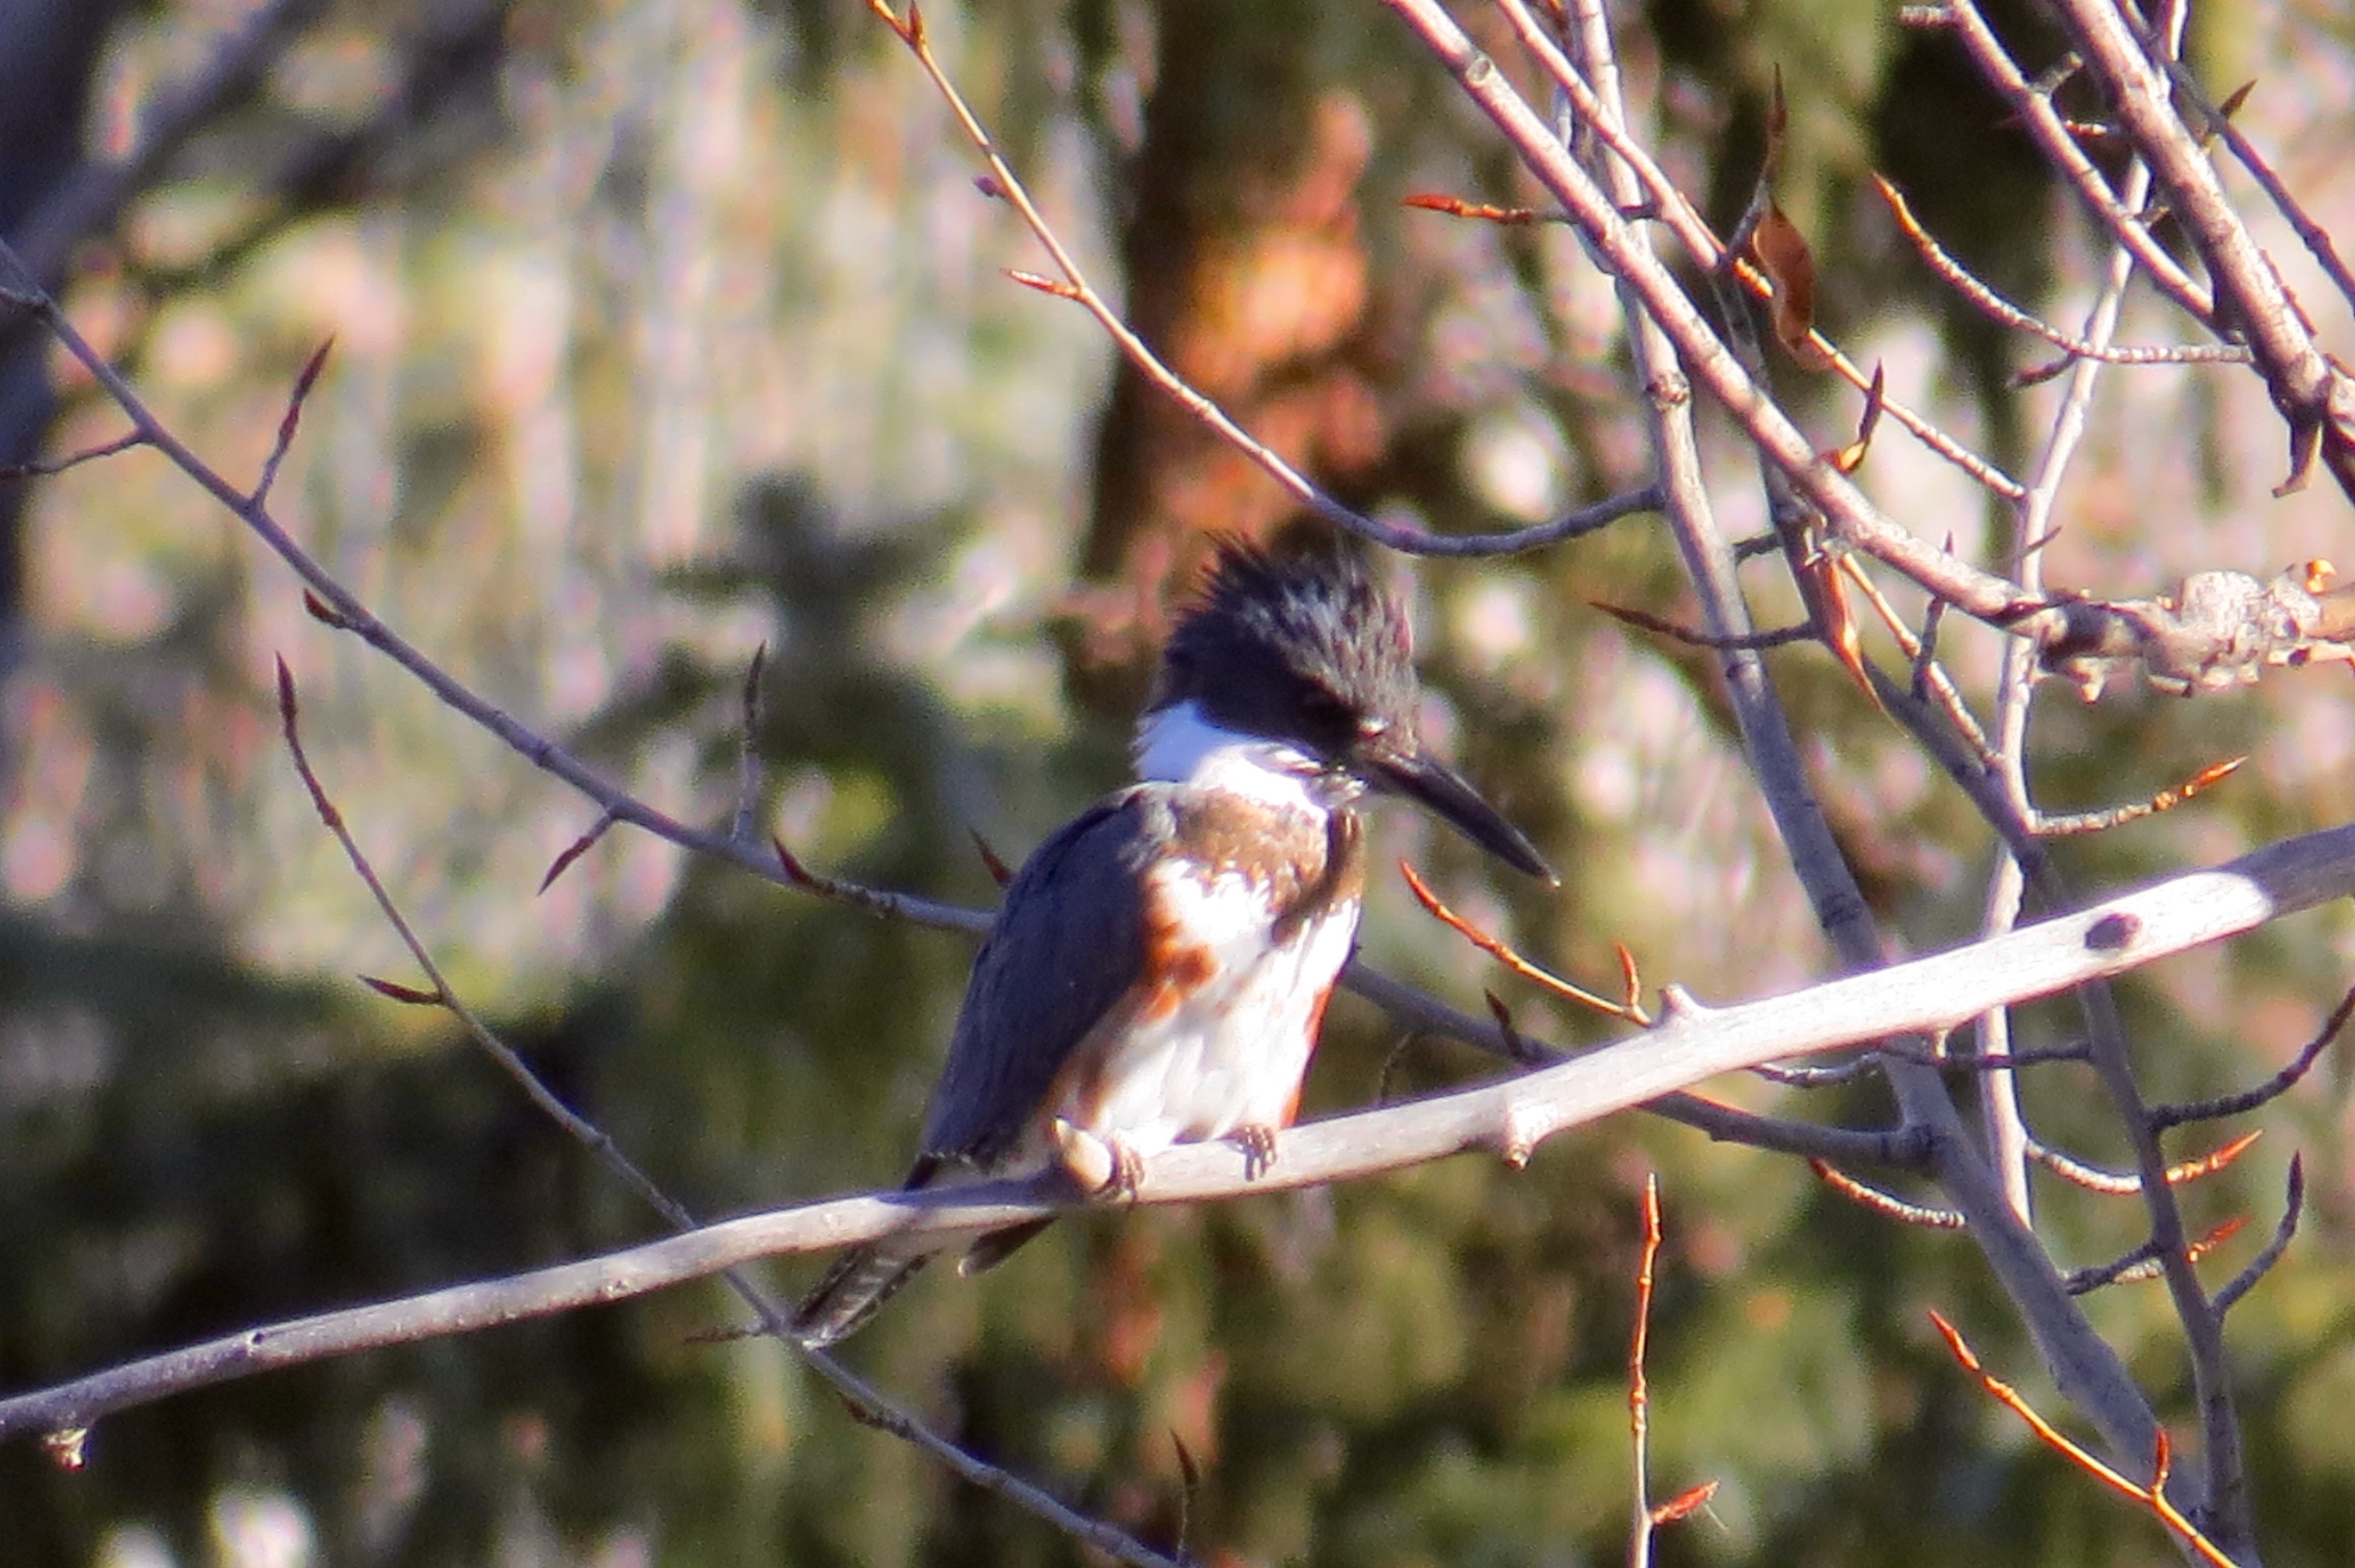 I WENT ON MY LAST ASPEN CENTER FOR ENVIRONMENTAL STUDIES BIRD CLUB HIKE THIS WEEK. ALTHOUGH MANY BIRDS HAVE 'FLOWN THE CHILLY COOP', THIS FEMALE KINGFISHER IS STILL HANGING AROUND. 